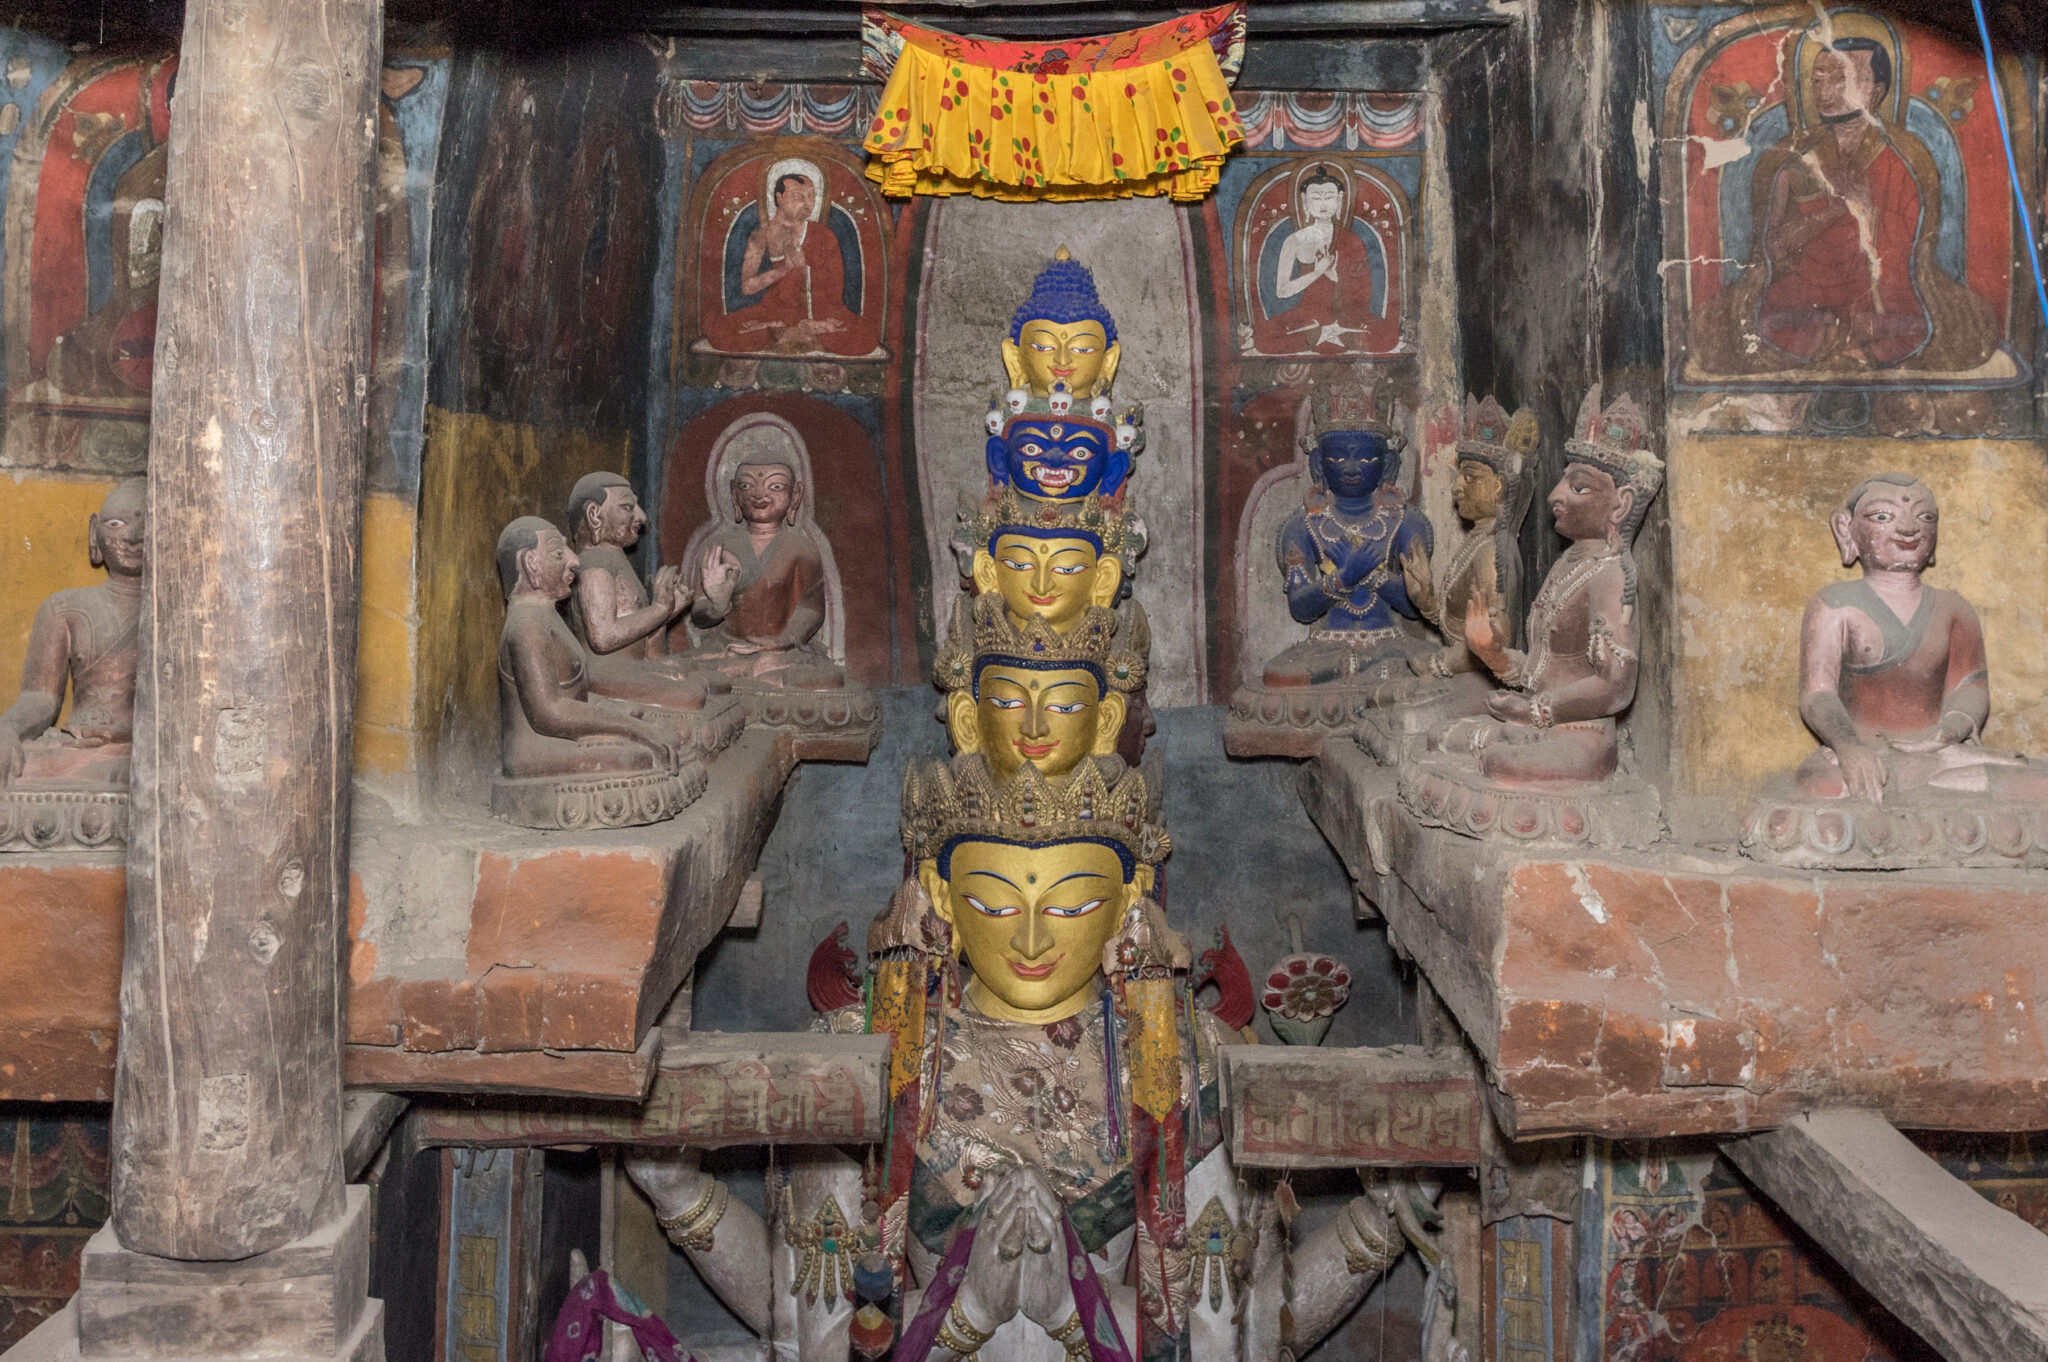 View of niche ledge decorated with murals and statues; at level with faces of eleven-headed Bodhisattva statue